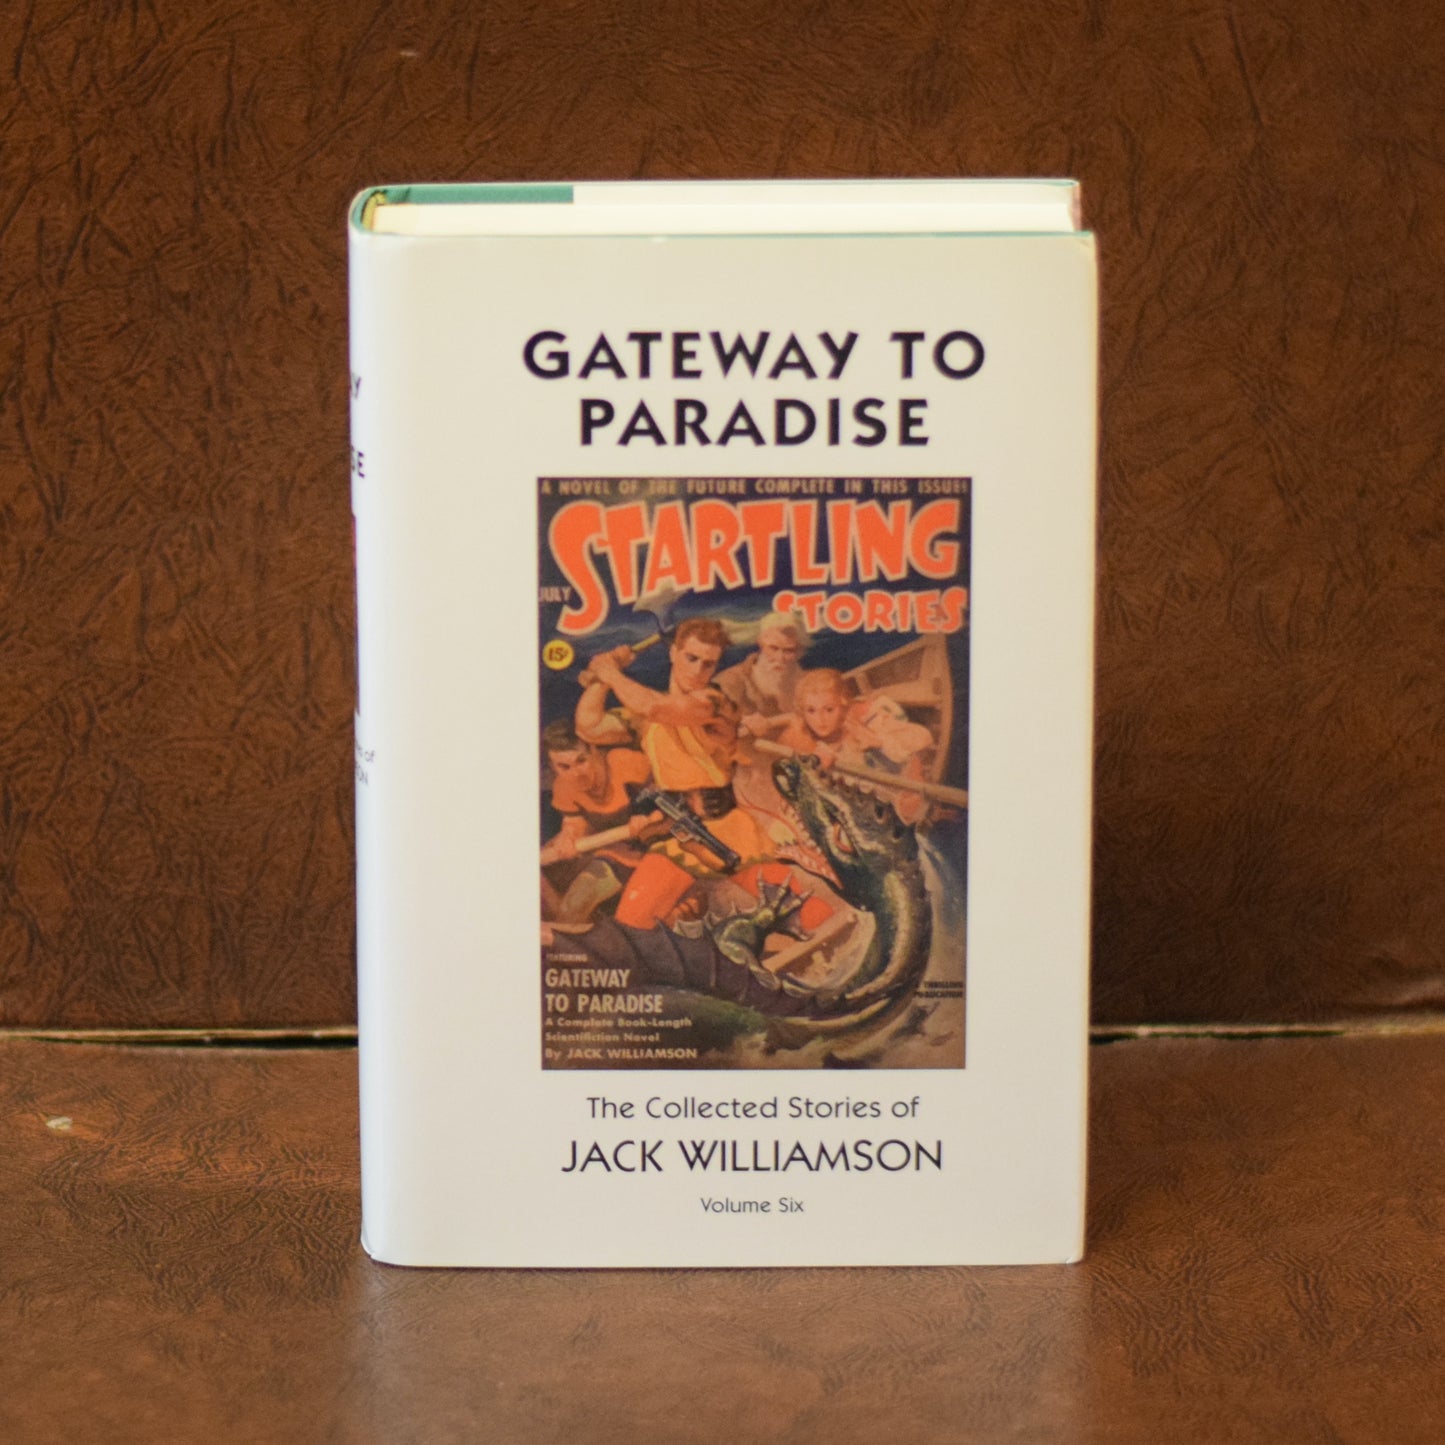 Vintage Sci-Fi Hardbacks: The Collected Stories of Jack Williamson, Vol 1-8 FIRST EDITIONS